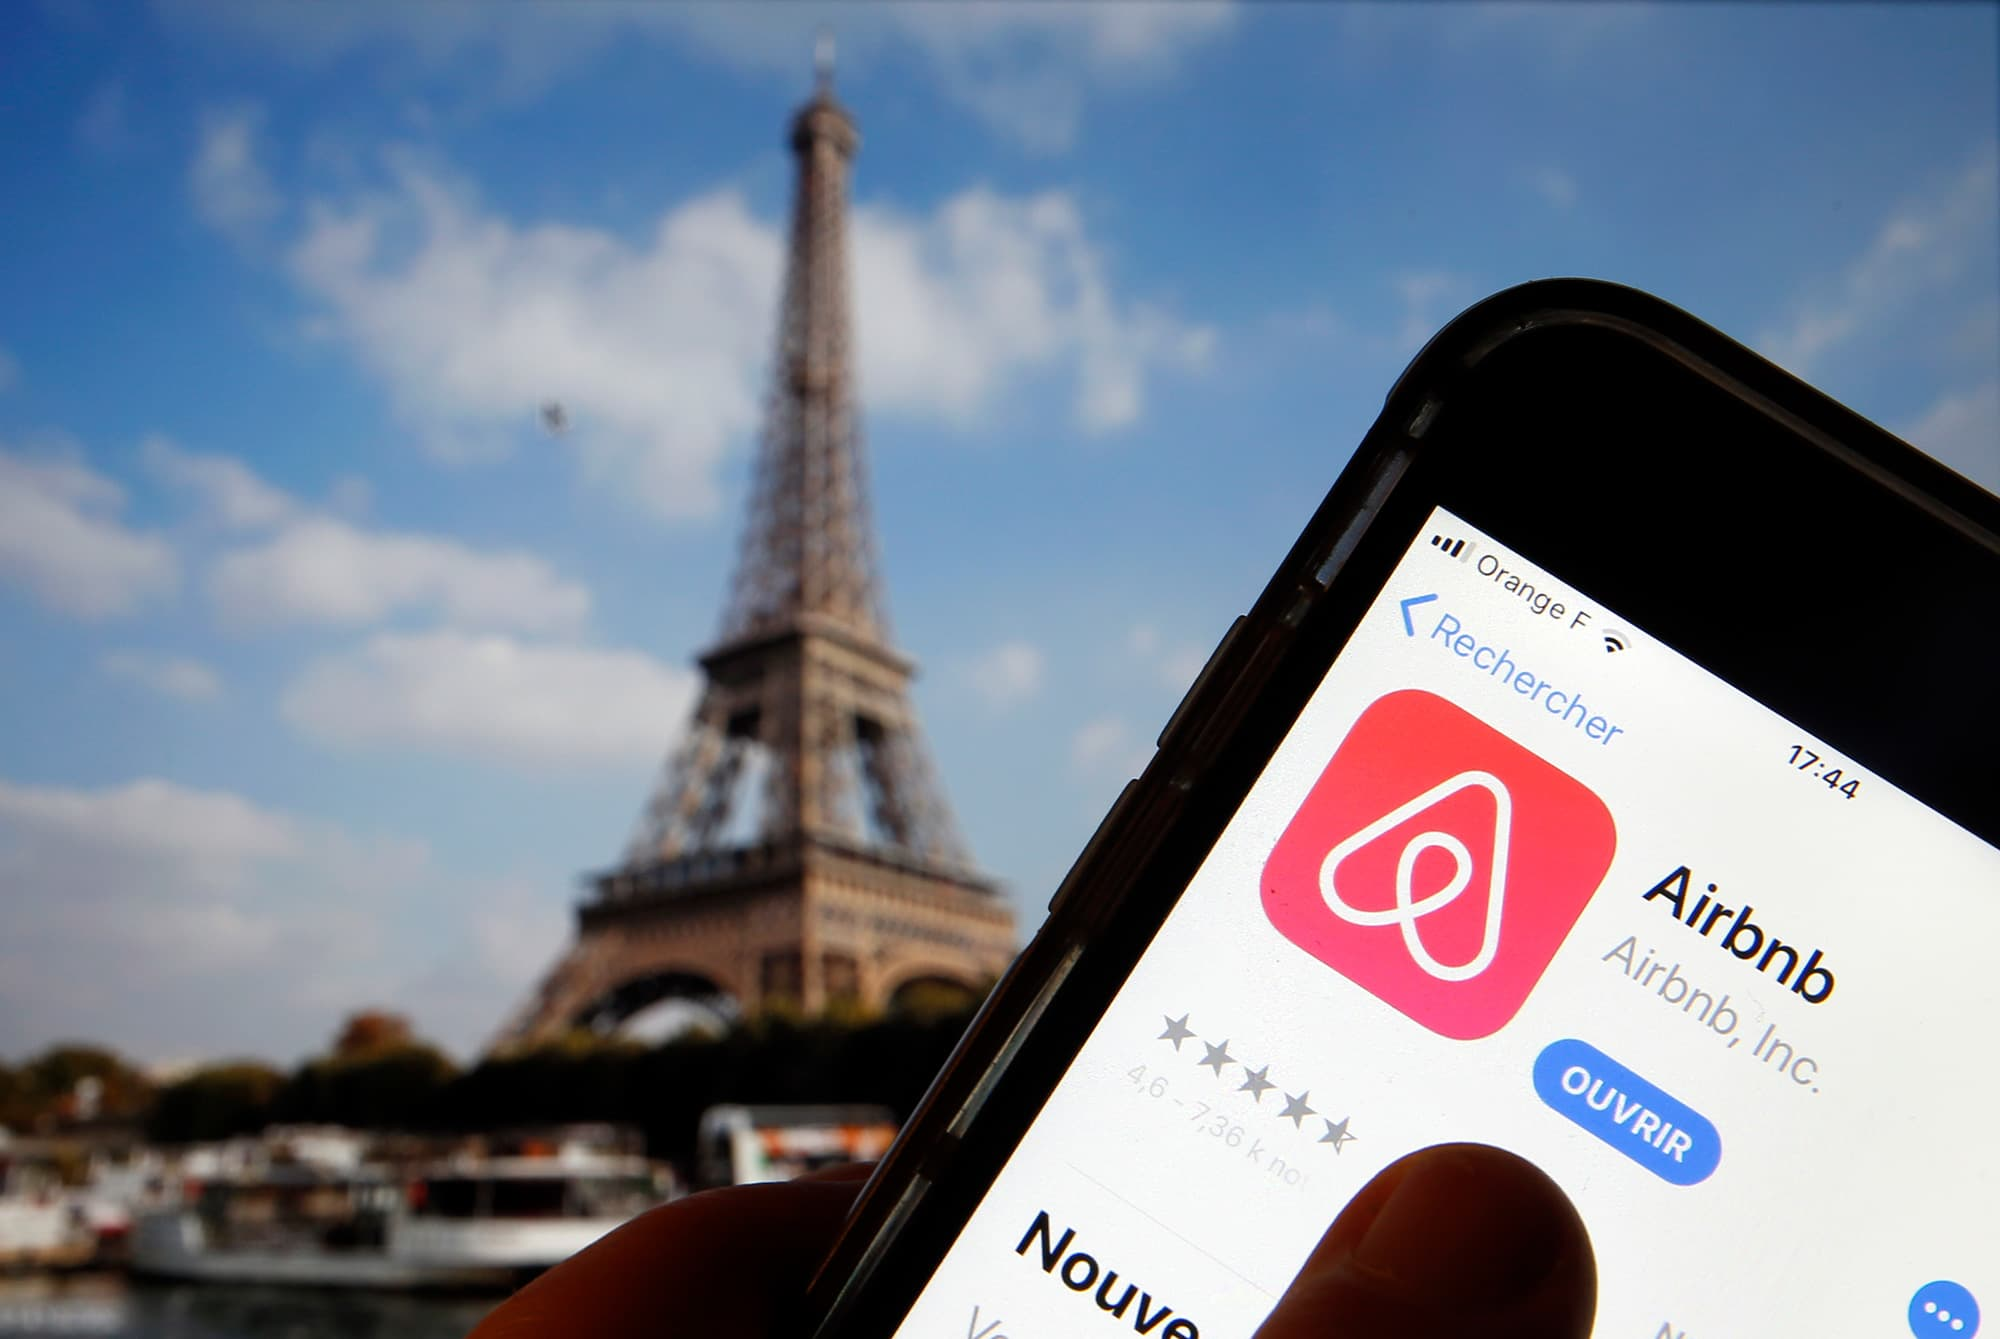 Paris Mayor Anne Hidalgo has publicly criticised the IOC's sponsorship deal with Airbnb but many locals are expected to cash in by renting out their properties during next year's Olympic and Paralympic Games ©Getty Images